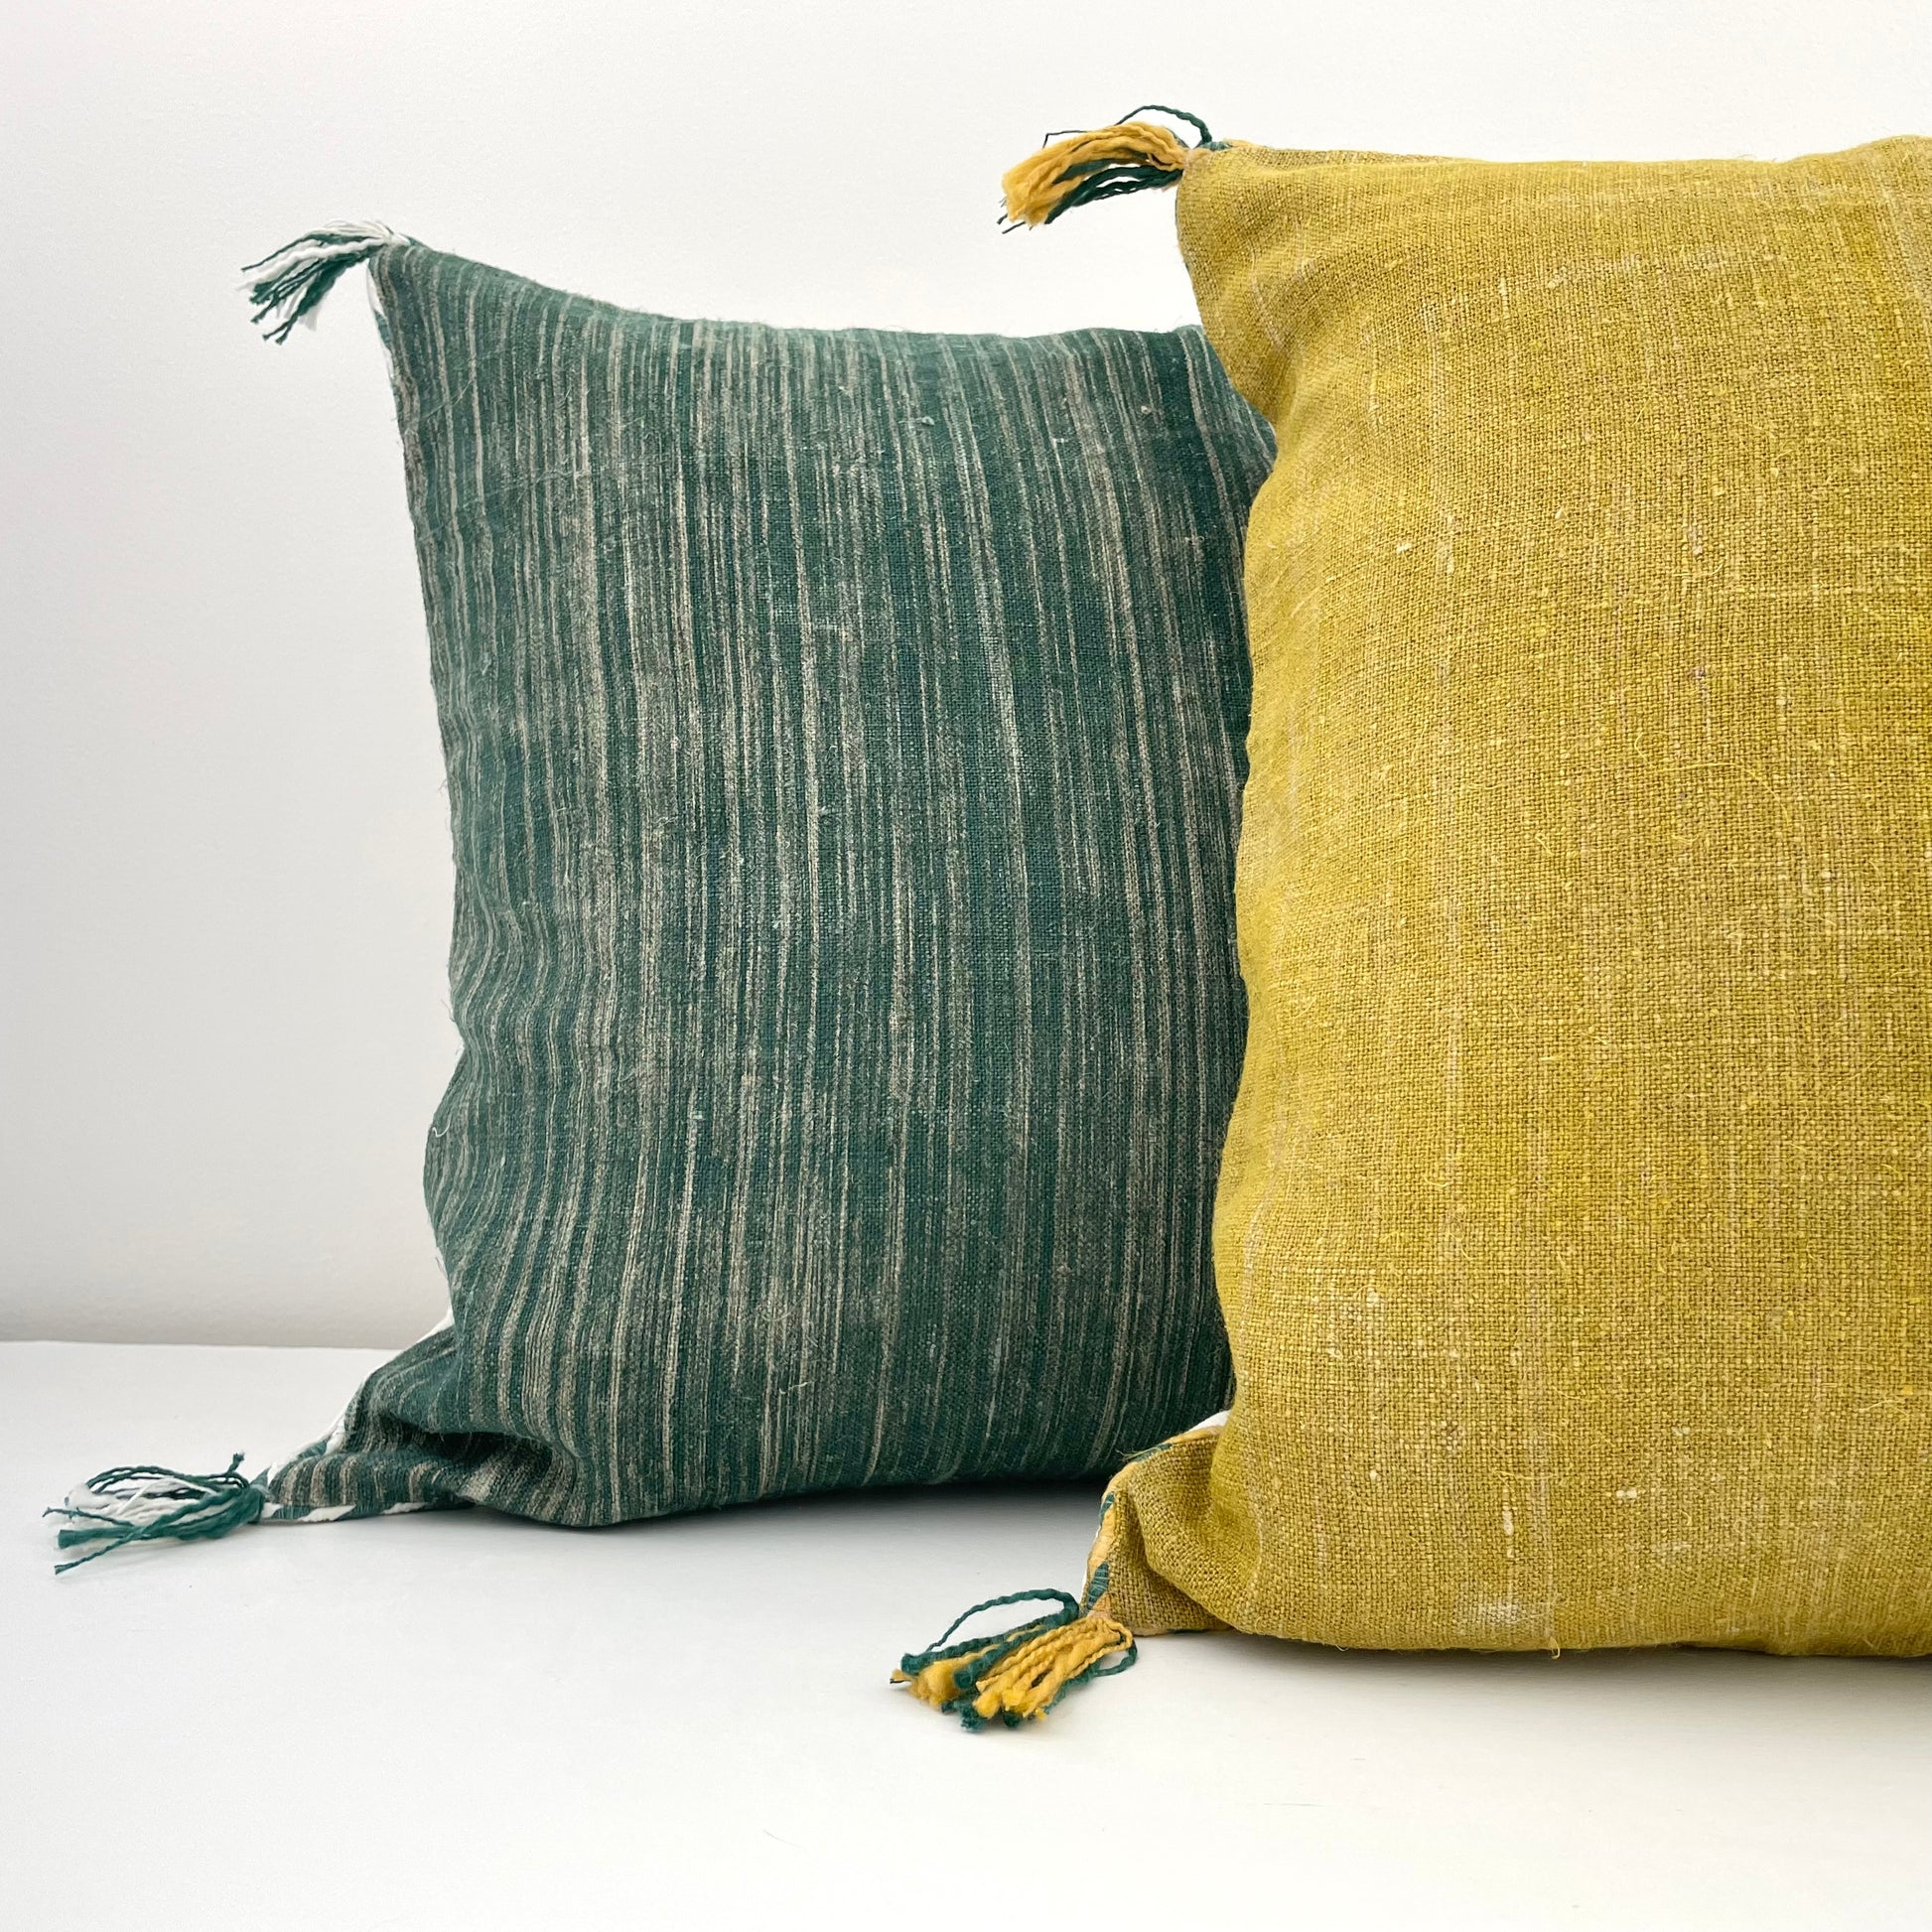 forest green and mustard linen 18x18 square pillow cover with striped edging and tassels